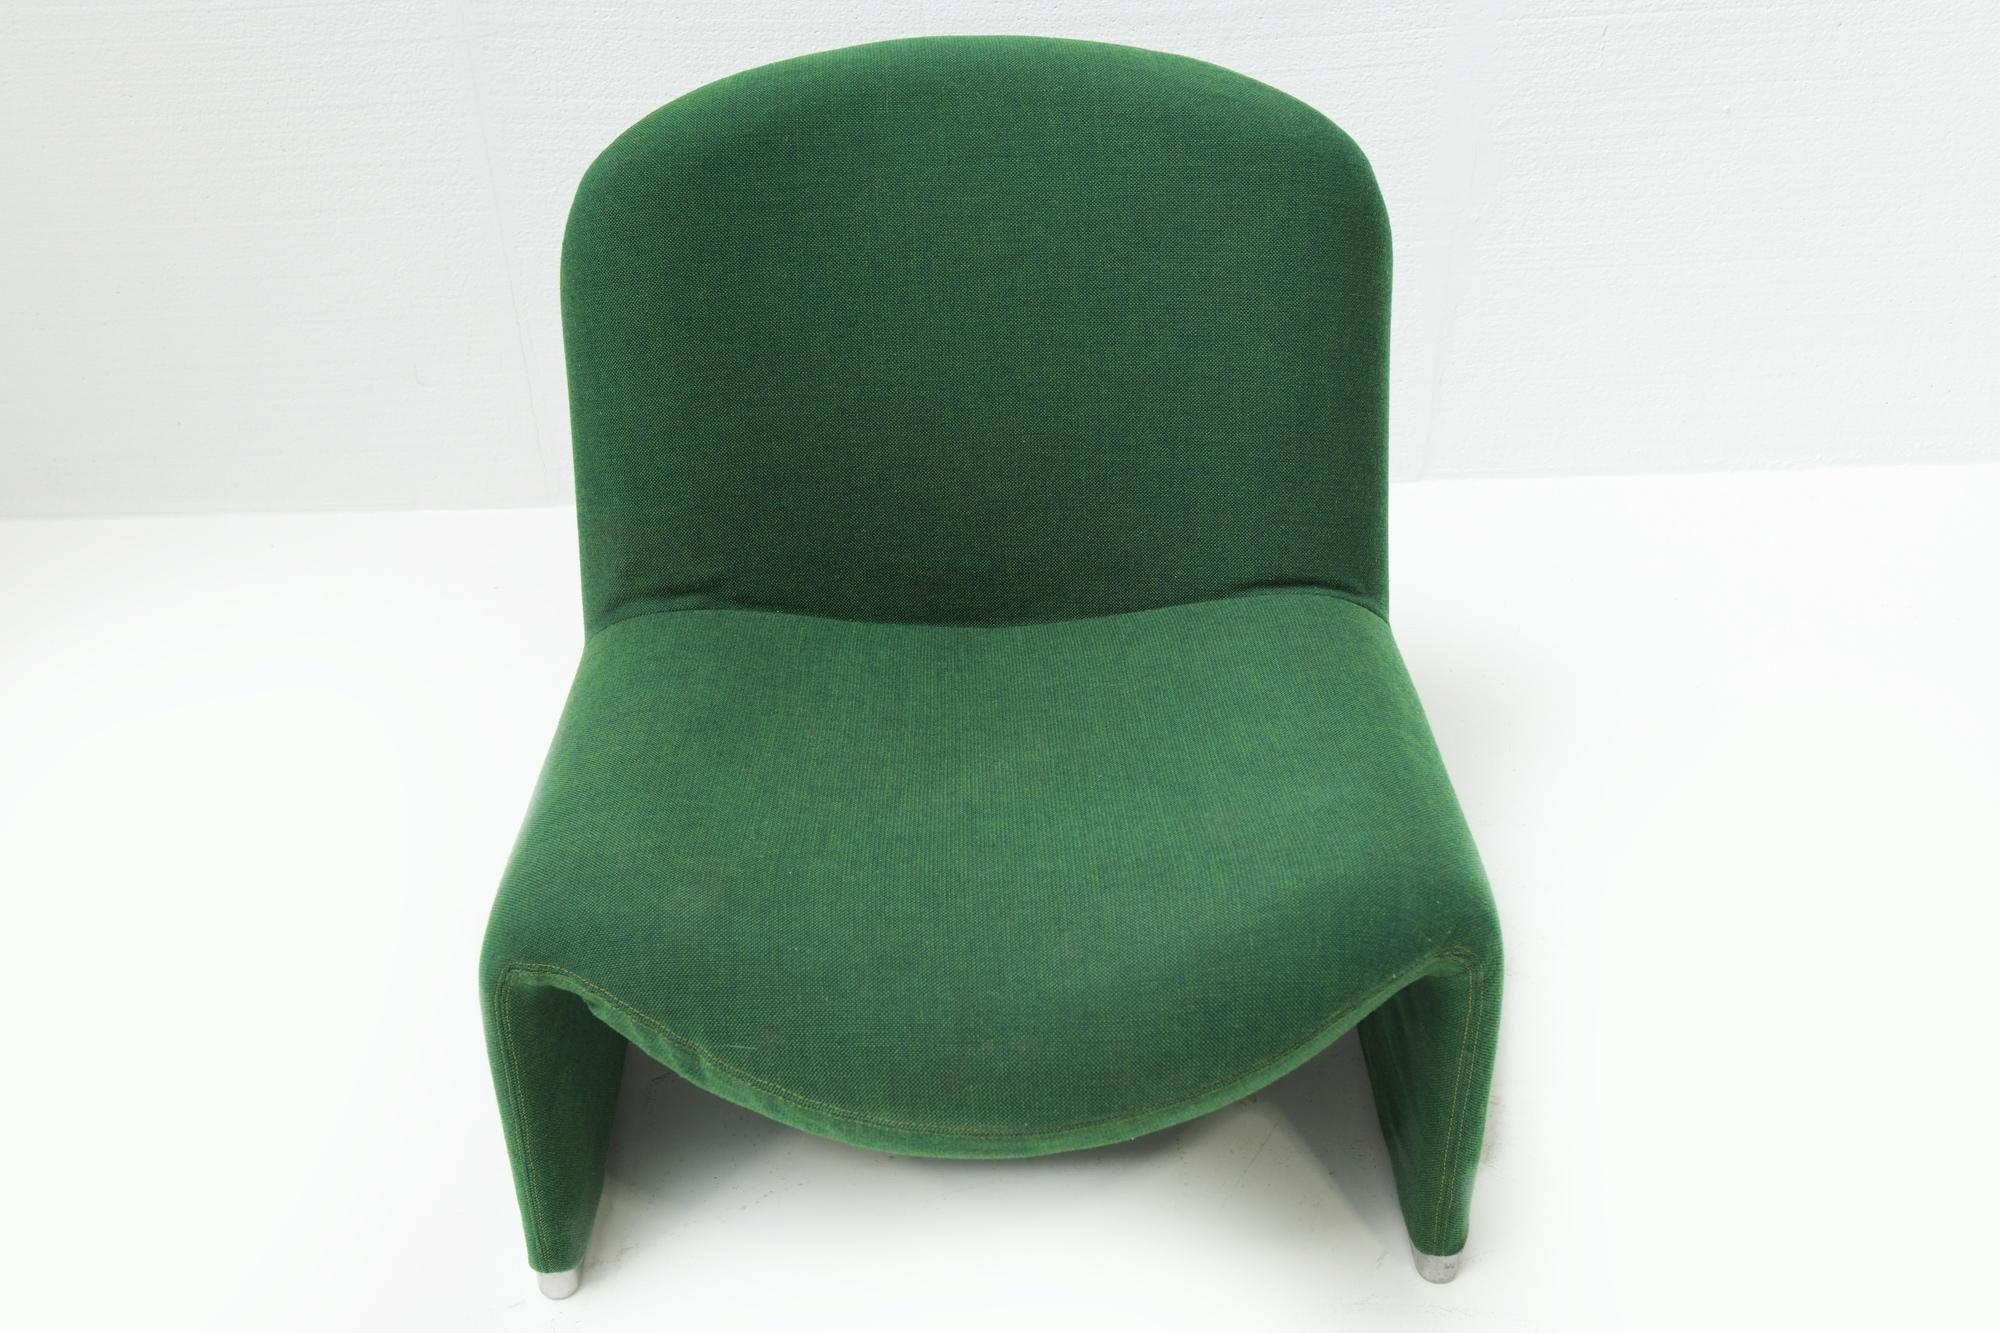 Vintage Alky chairs in original green fabric by Giancarlo Piretti for Castelli 1